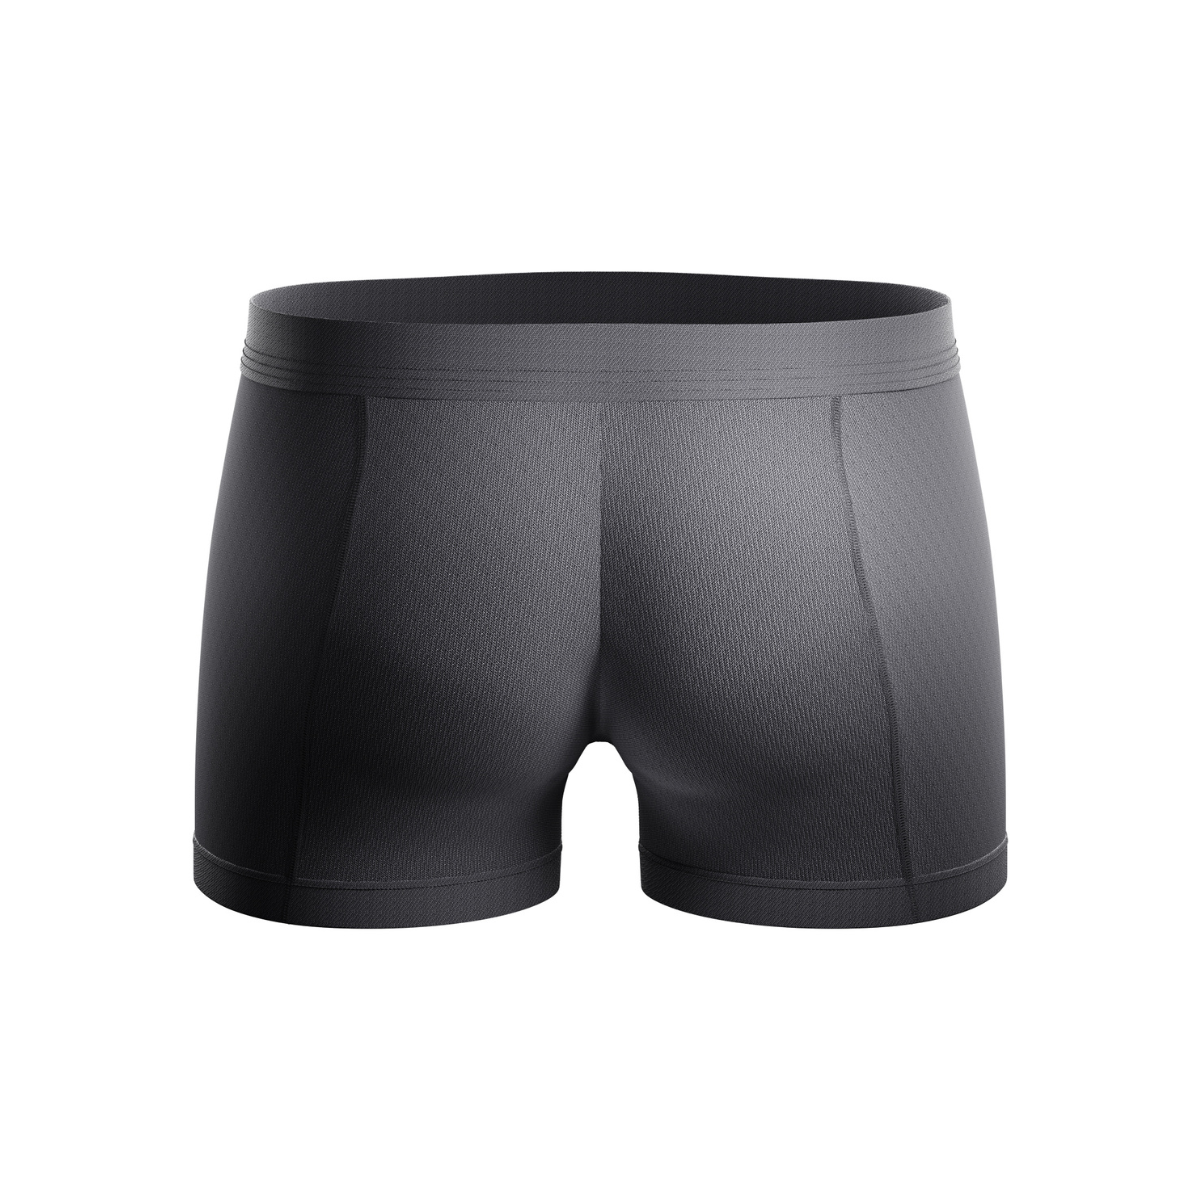 BOXR | The Classic Bamboe Boxers 4-Pack Grijs